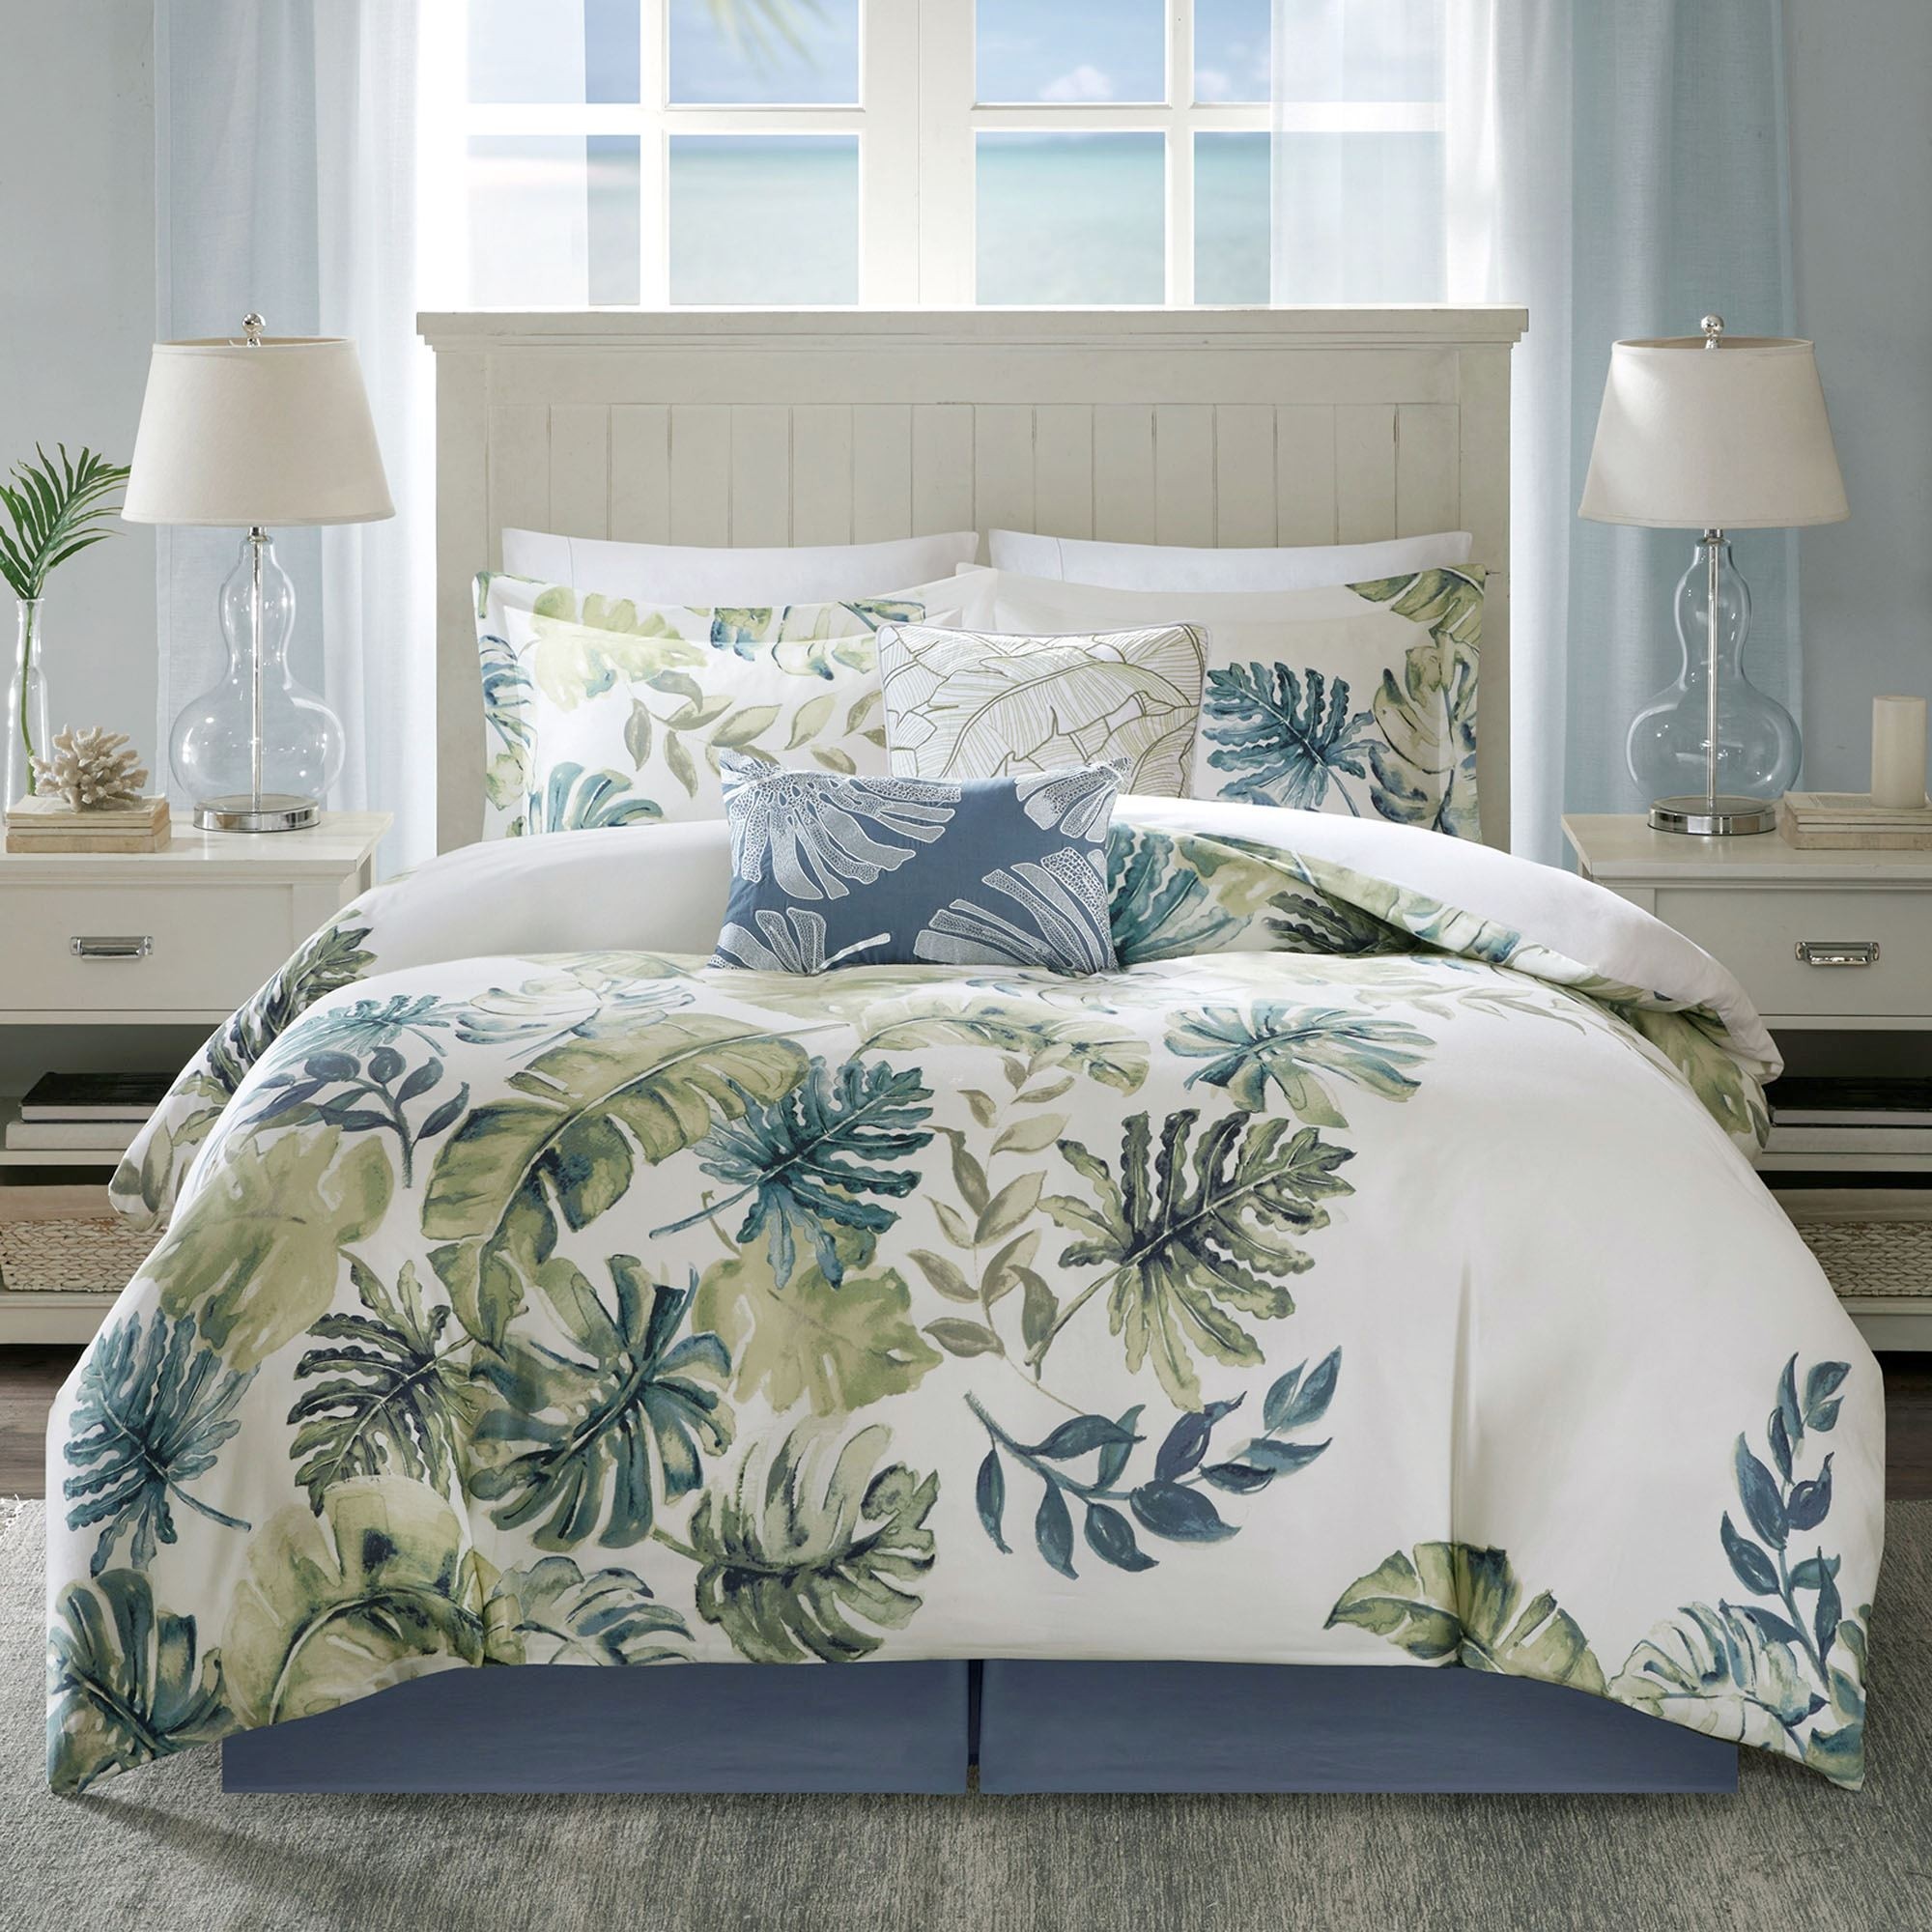 Lorelai tropical 6 pc comforter bed set by harbor house